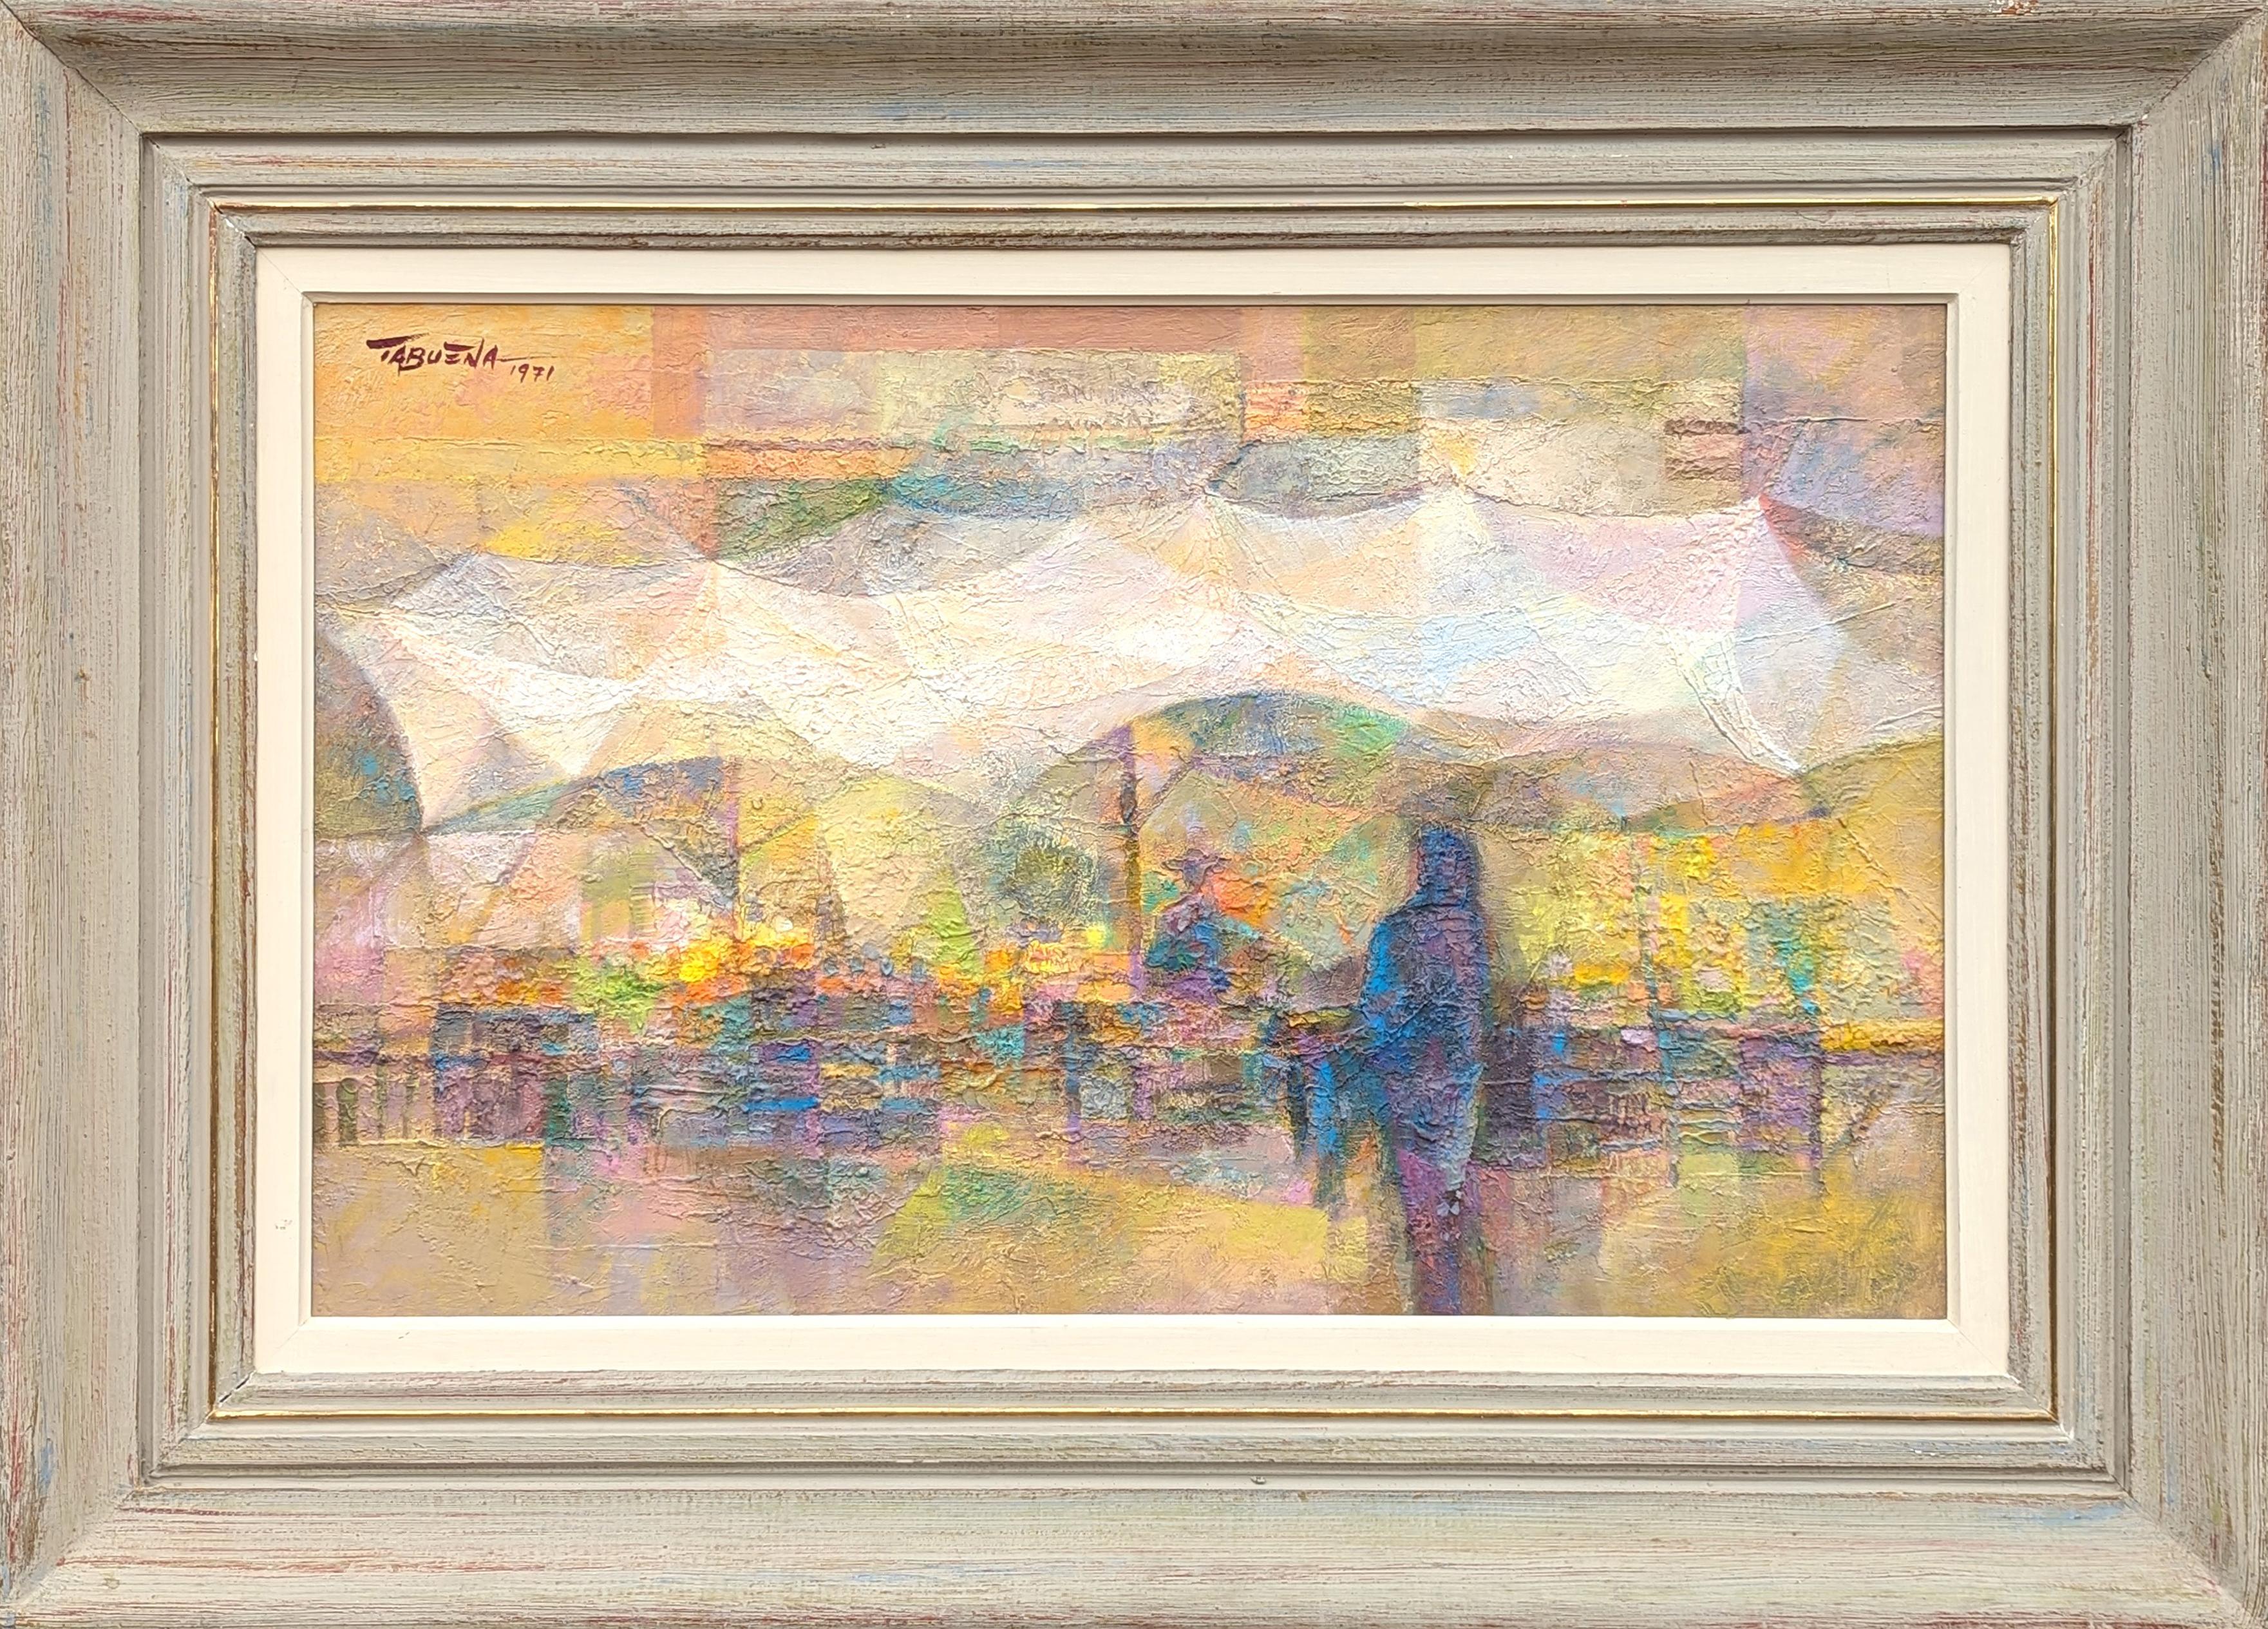 Romeo Tabuena Landscape Painting - "Market Tents" Modern Abstract Pastel Toned Cubist Style Street Scene